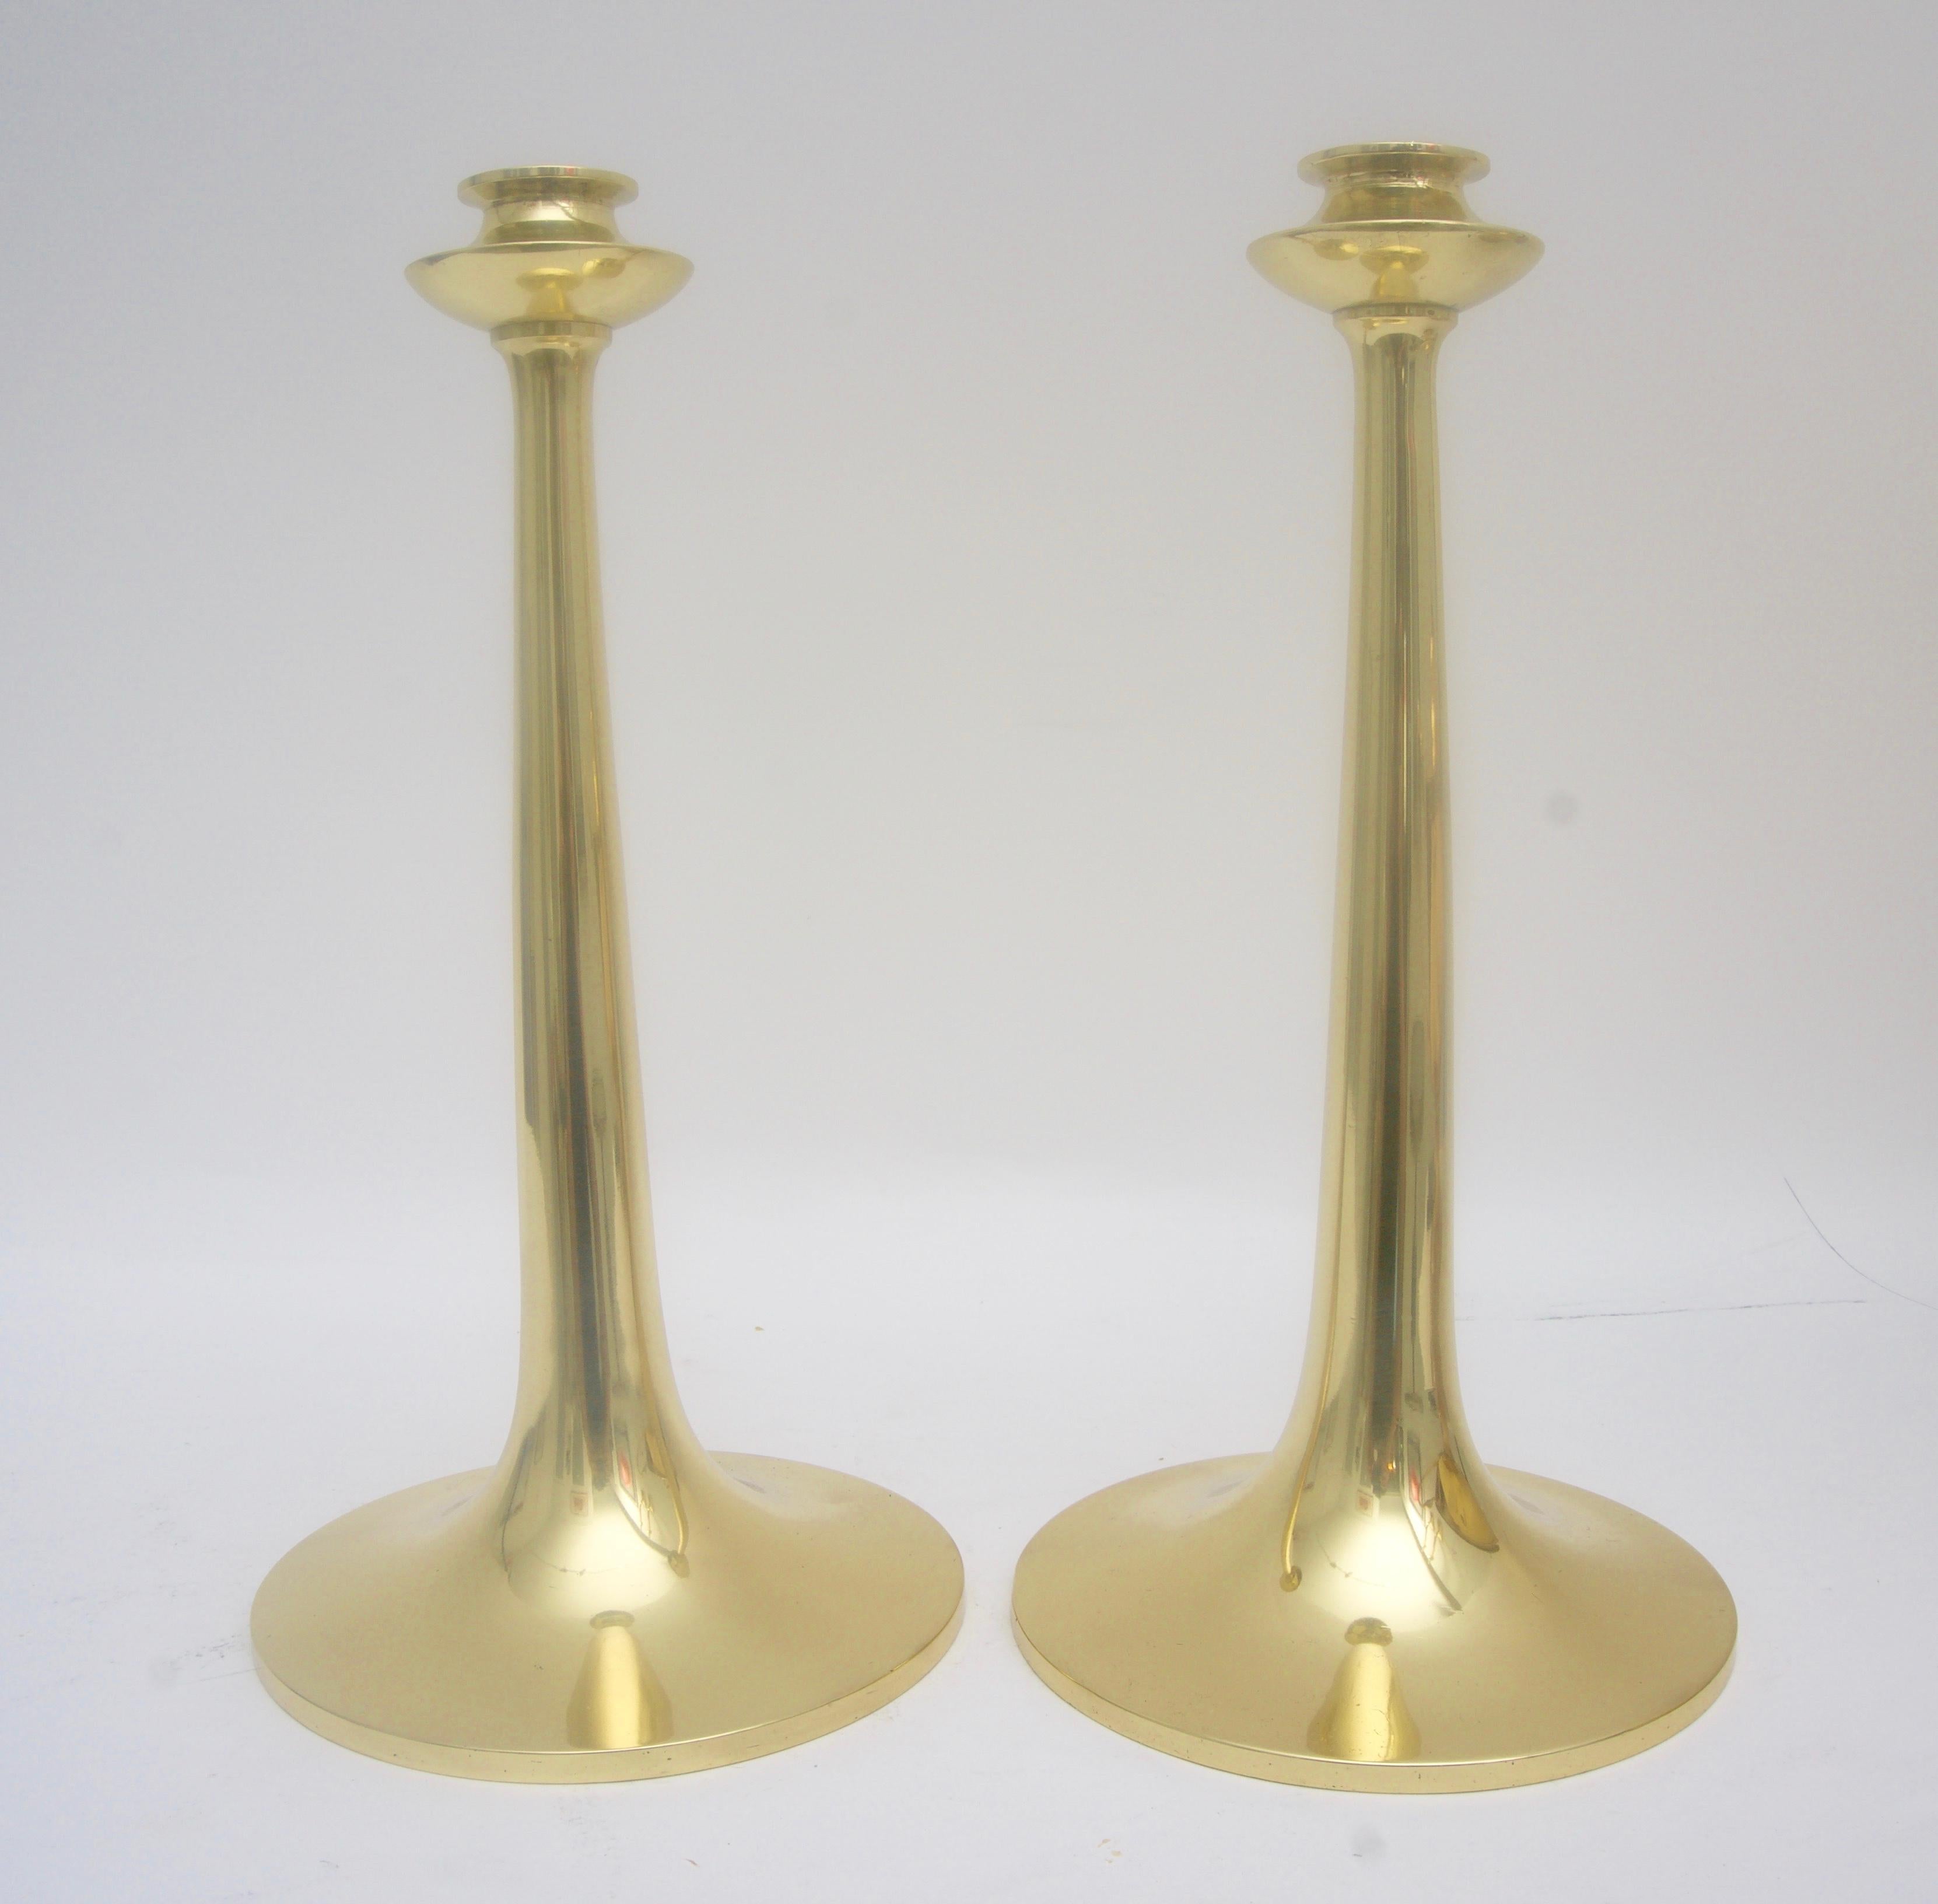 This stylish pair of Bradley & Hubbard brass candlesticks have been professionally polished and lacquered so no tarnishing.

FYI:
Bradley & Hubbard Manufacturing Company
Fate Sold to the Charles Parker Company
Founded 1852

The Bradley &